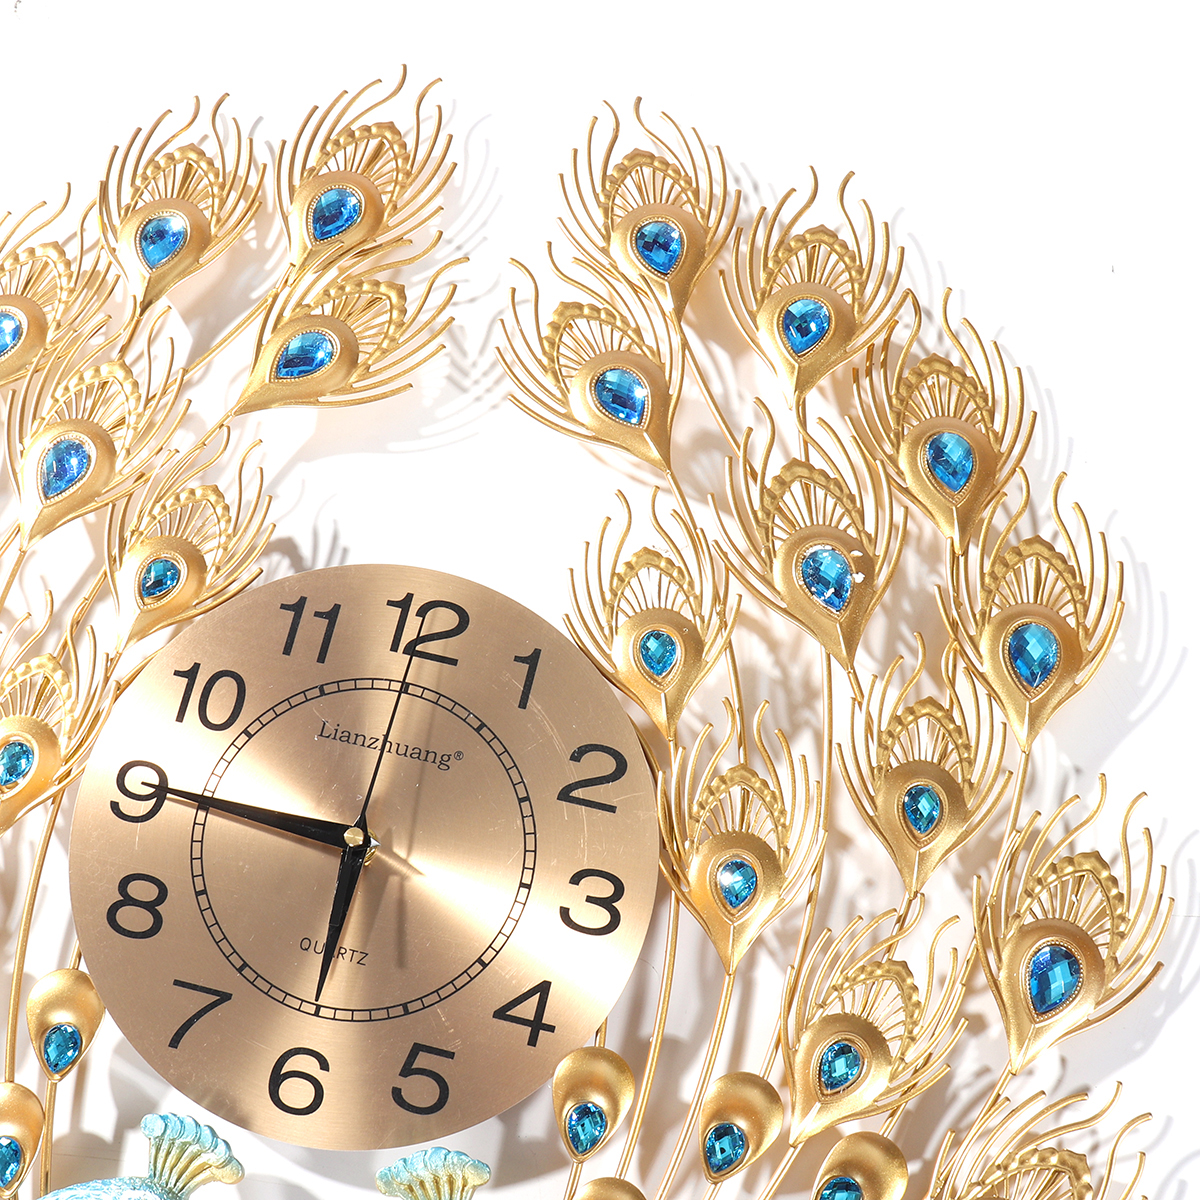 3D-Peacock-Wall-Clock-Large-Accurate-Mute-Metal-Art-Creative-Decor-Home-1743546-10